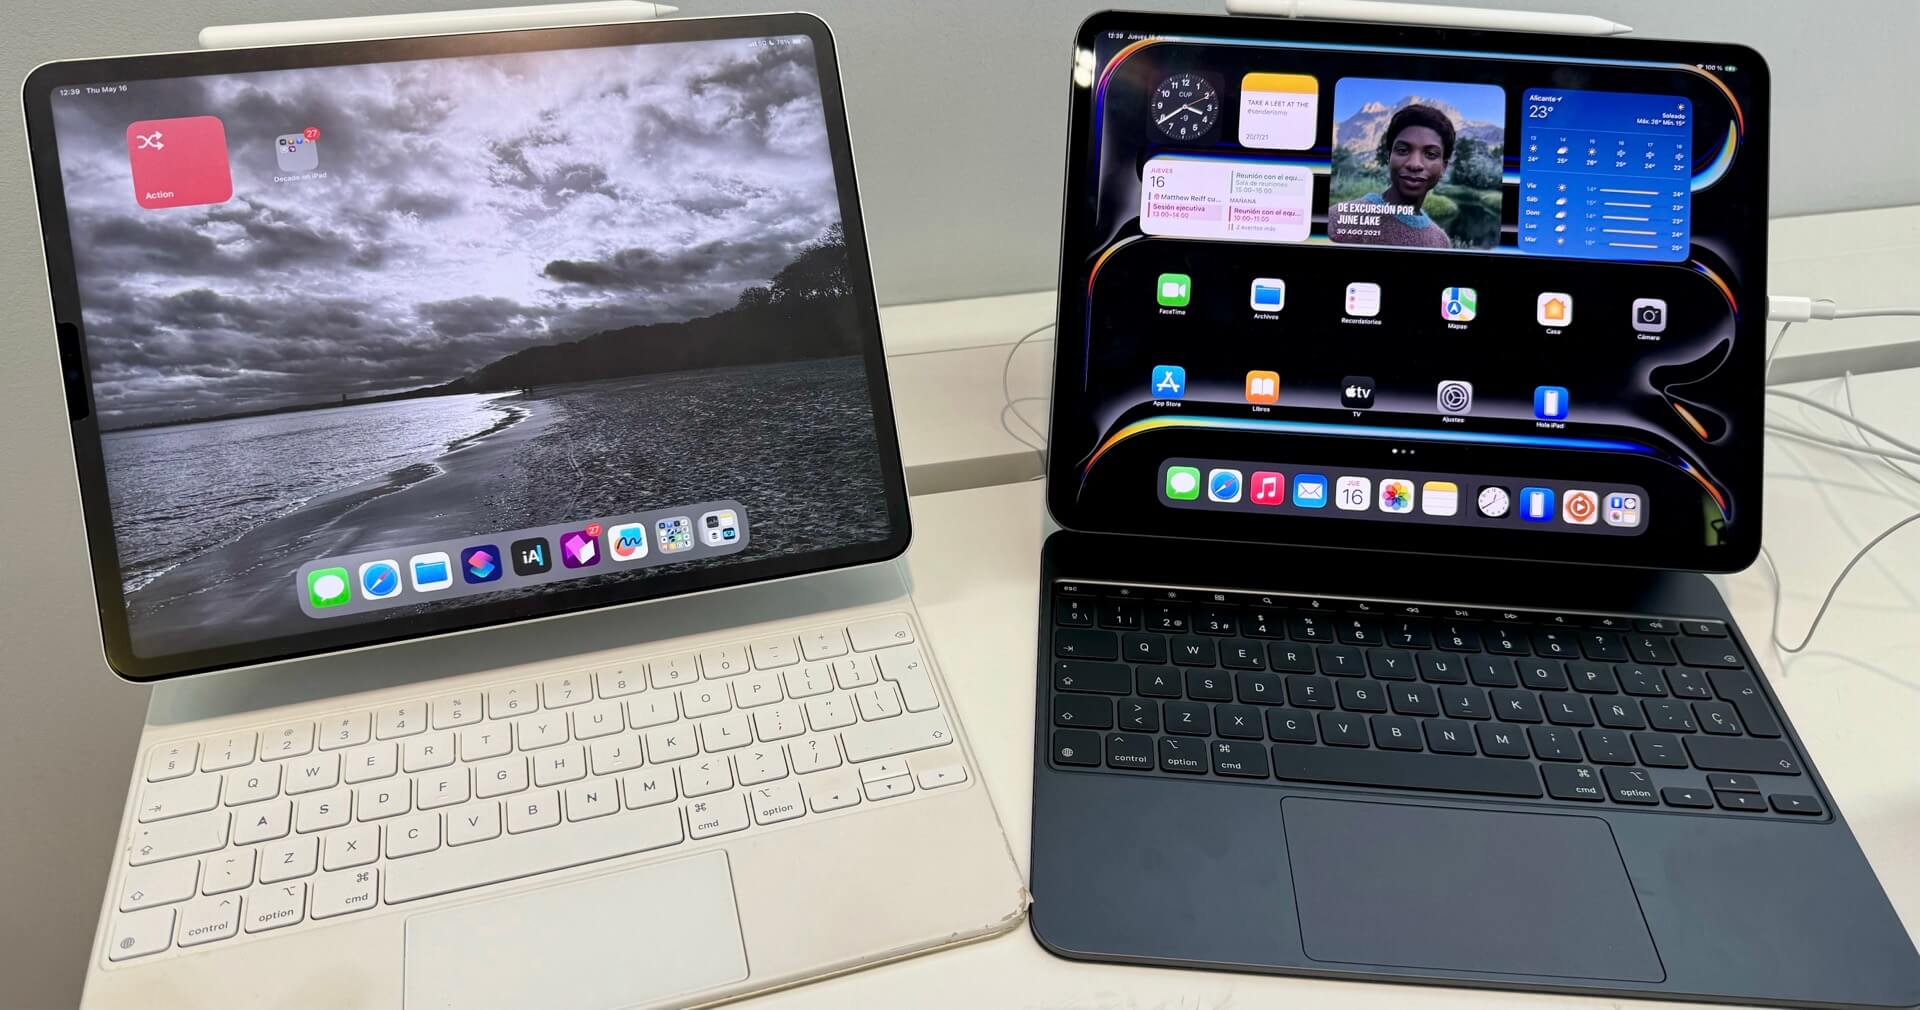 Second impressions of the all-new M4 13” iPad Pro - it’s thin and light!